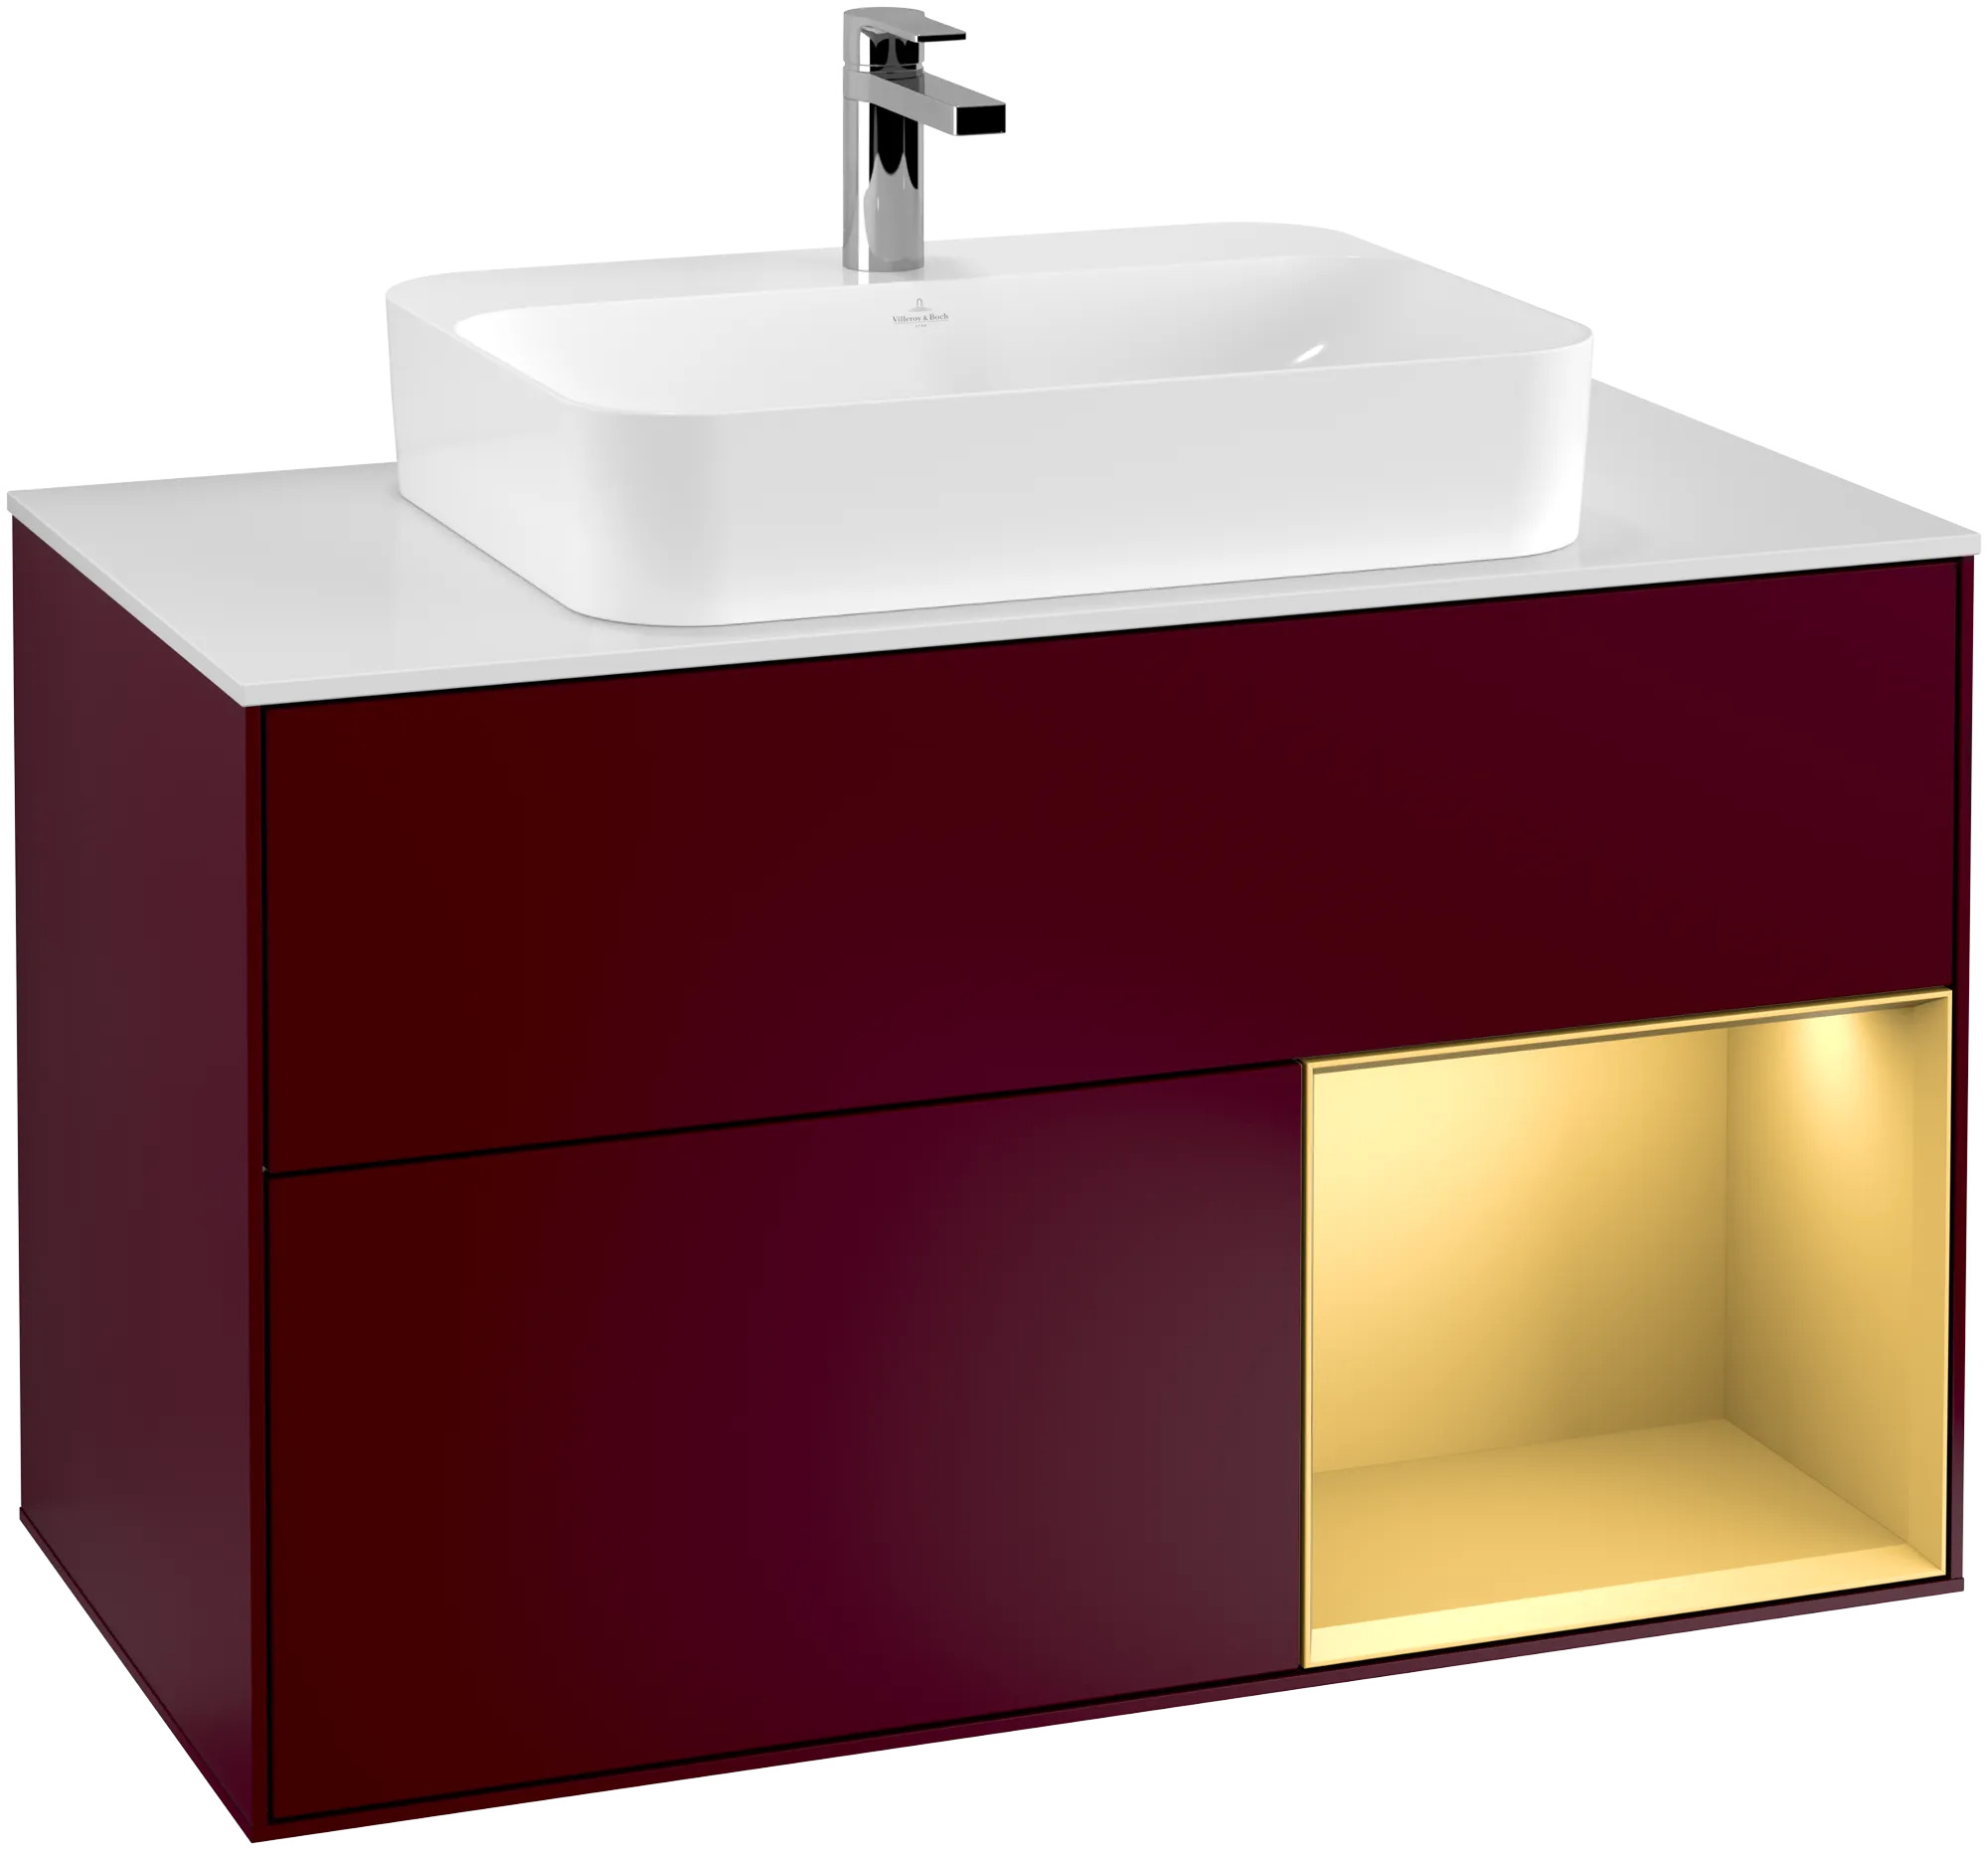 Picture of VILLEROY BOCH Finion Vanity unit, with lighting, 2 pull-out compartments, 1000 x 603 x 501 mm, Peony Matt Lacquer / Gold Matt Lacquer / Glass White Matt #G371HFHB